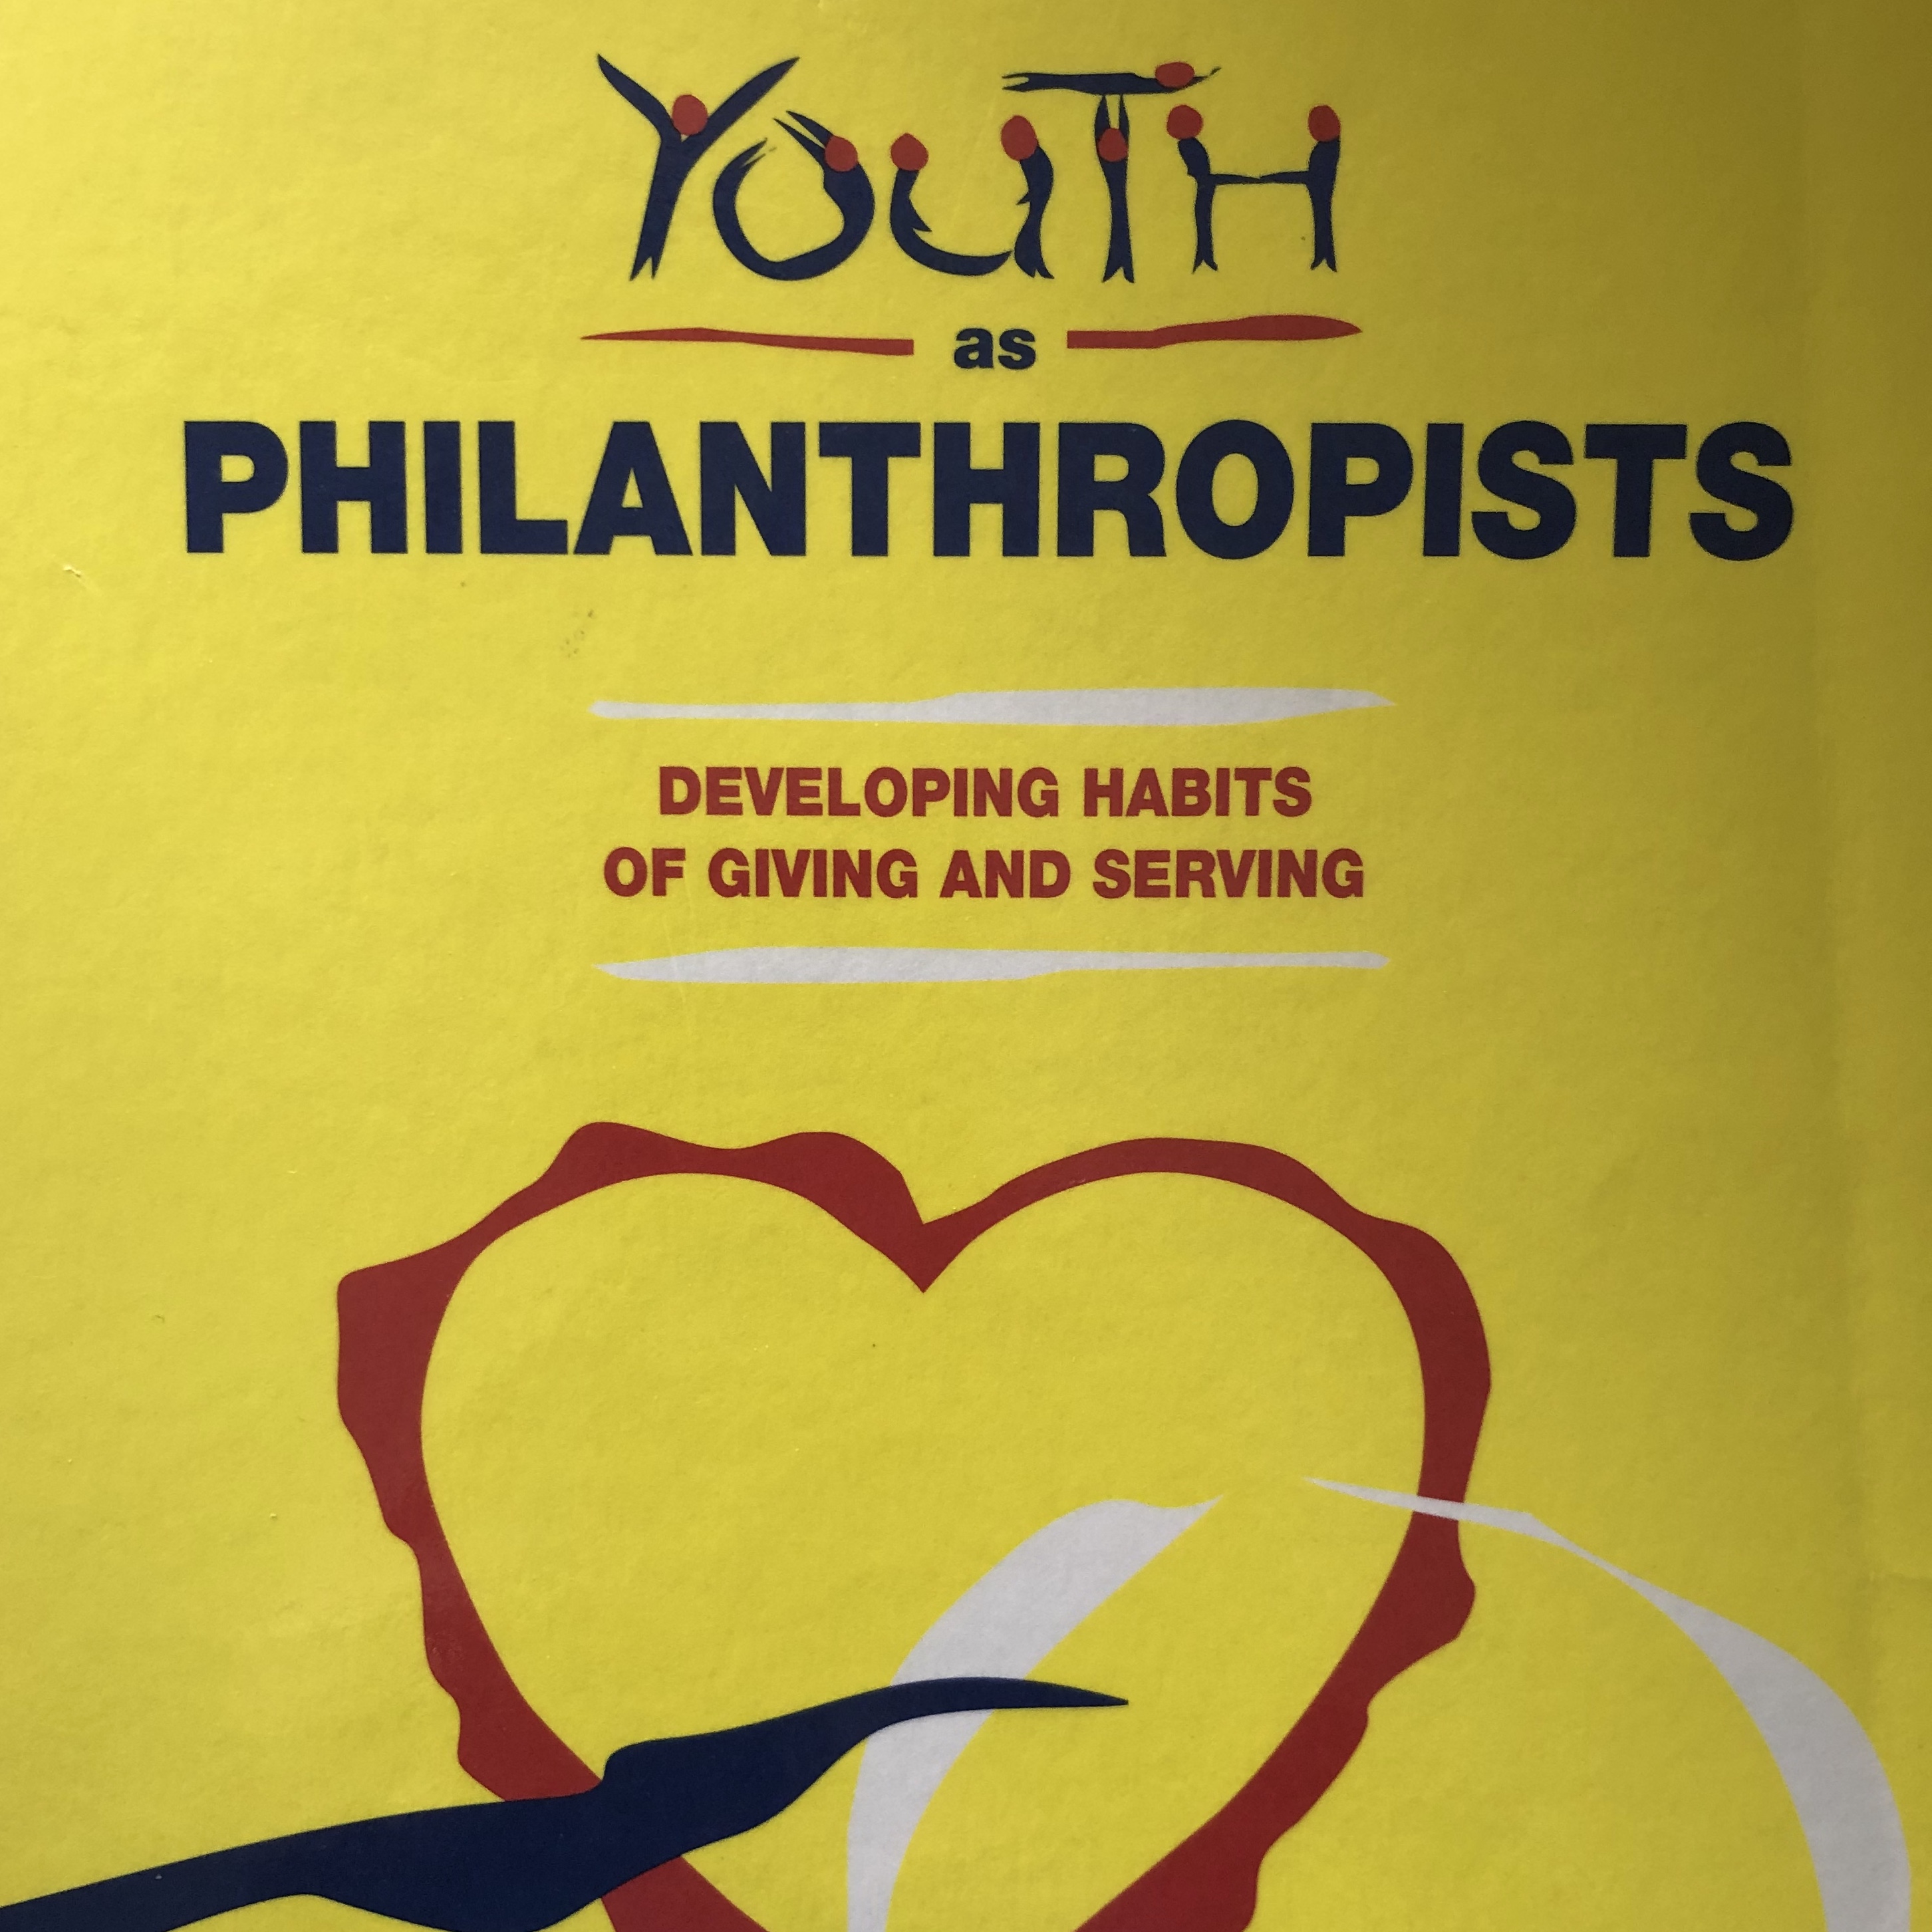 Youth as Philanthropists